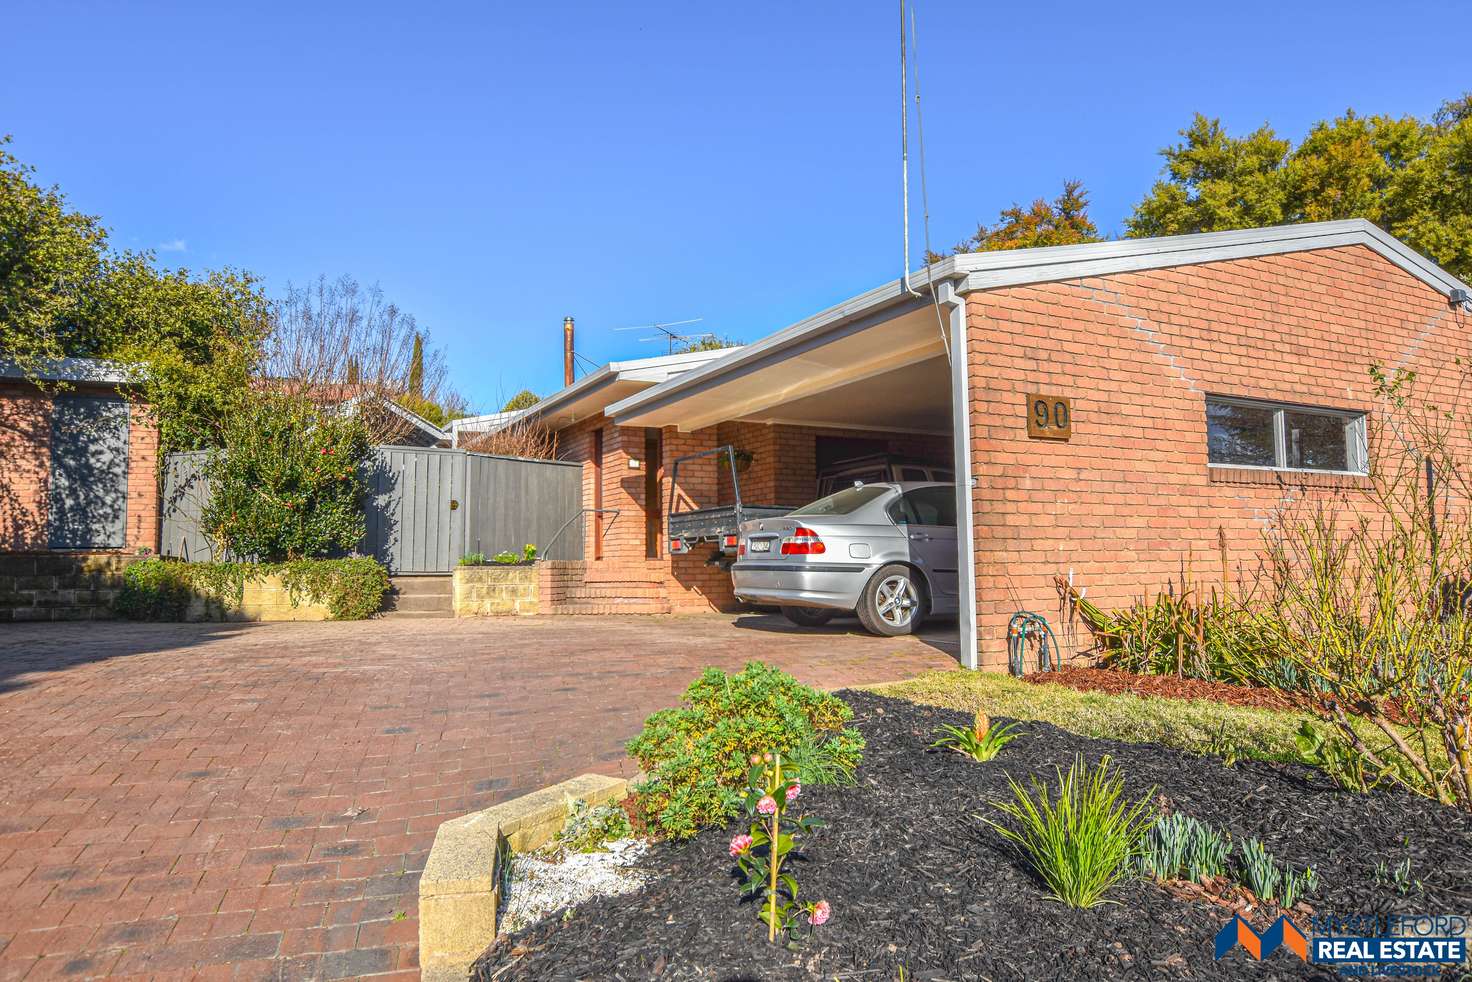 Main view of Homely house listing, 90 O'Donnell Avenue, Myrtleford VIC 3737